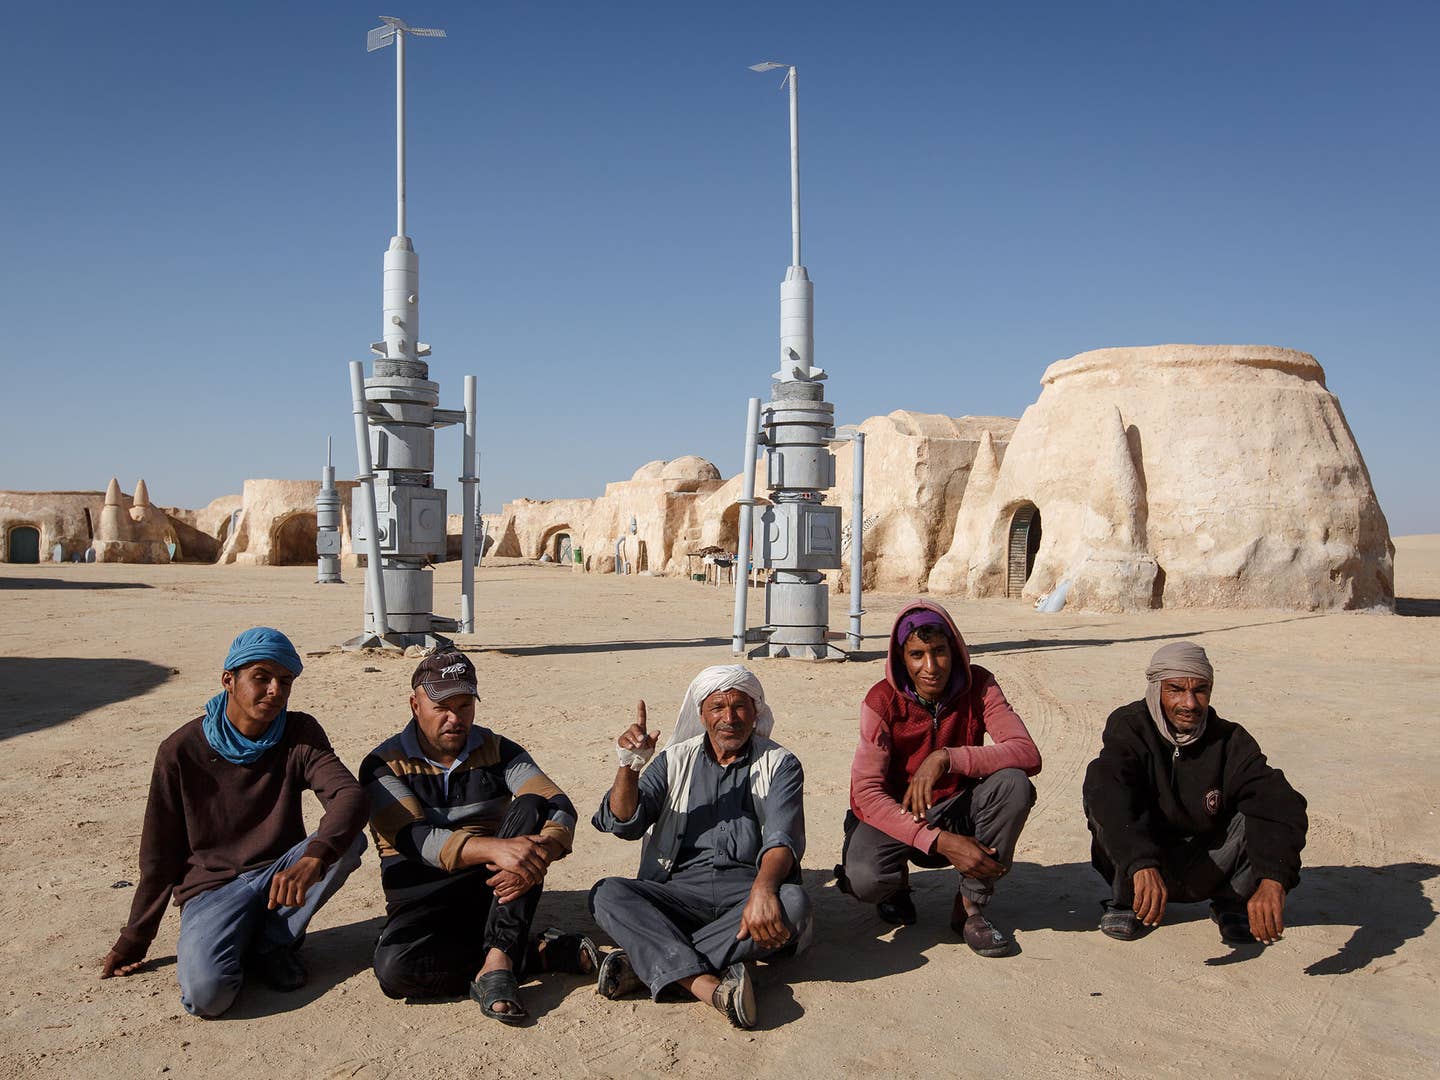 That Time We Stumbled on Some Guys Cooking Lunch on Tatooine